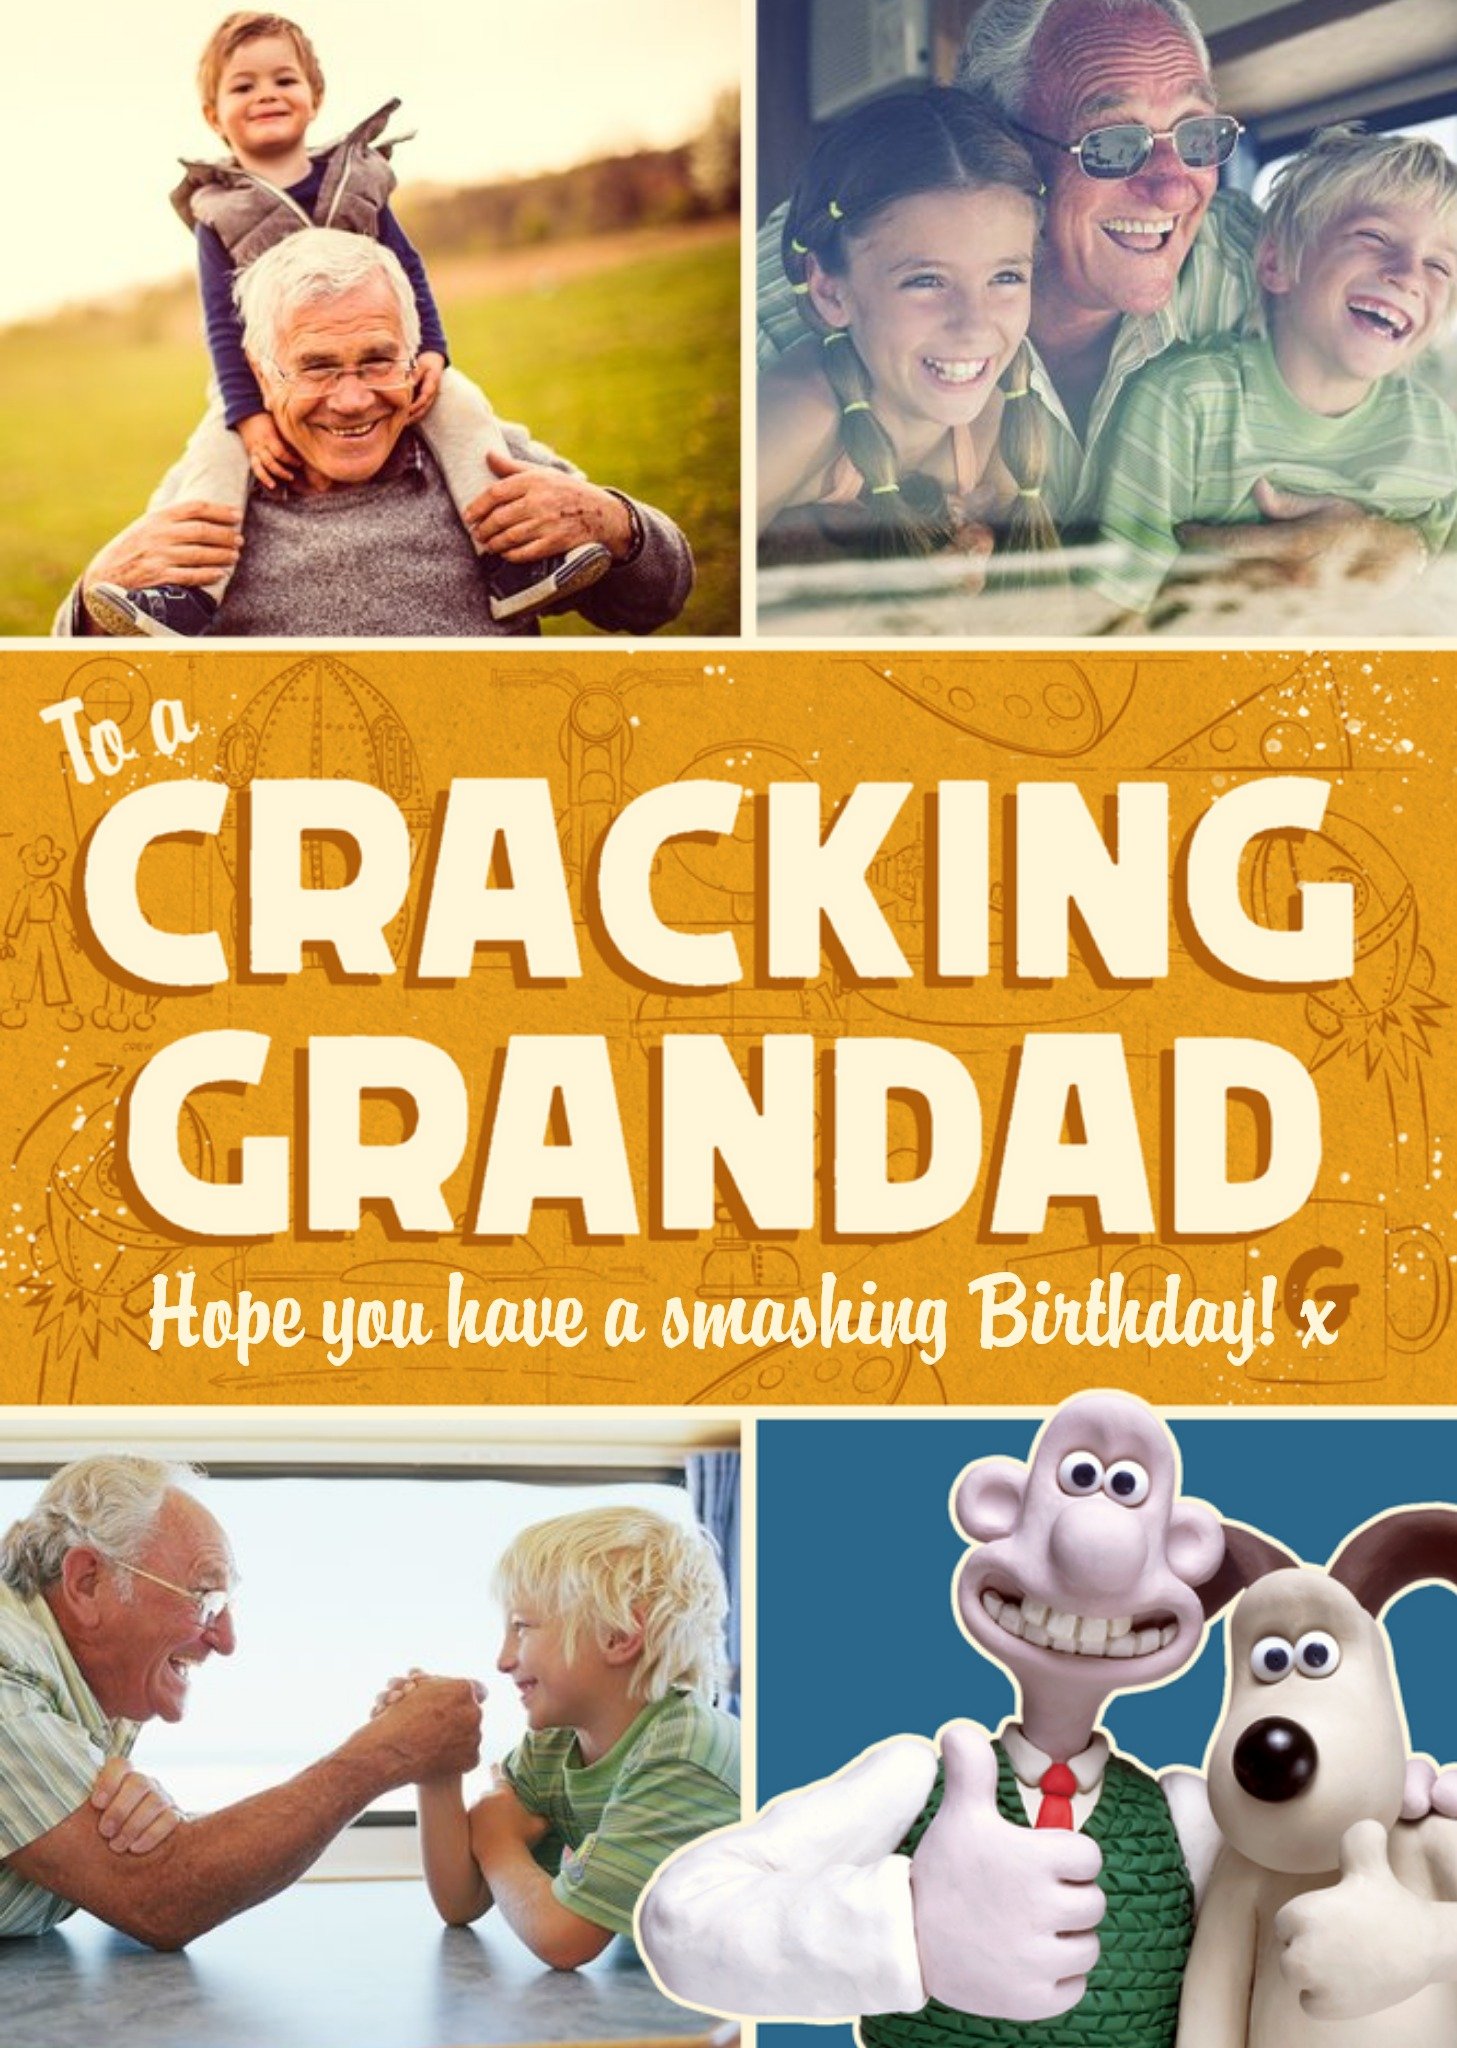 Moonpig Wallace And Gromit To A Cracking Grandad Birthday Photo Upload Card, Large